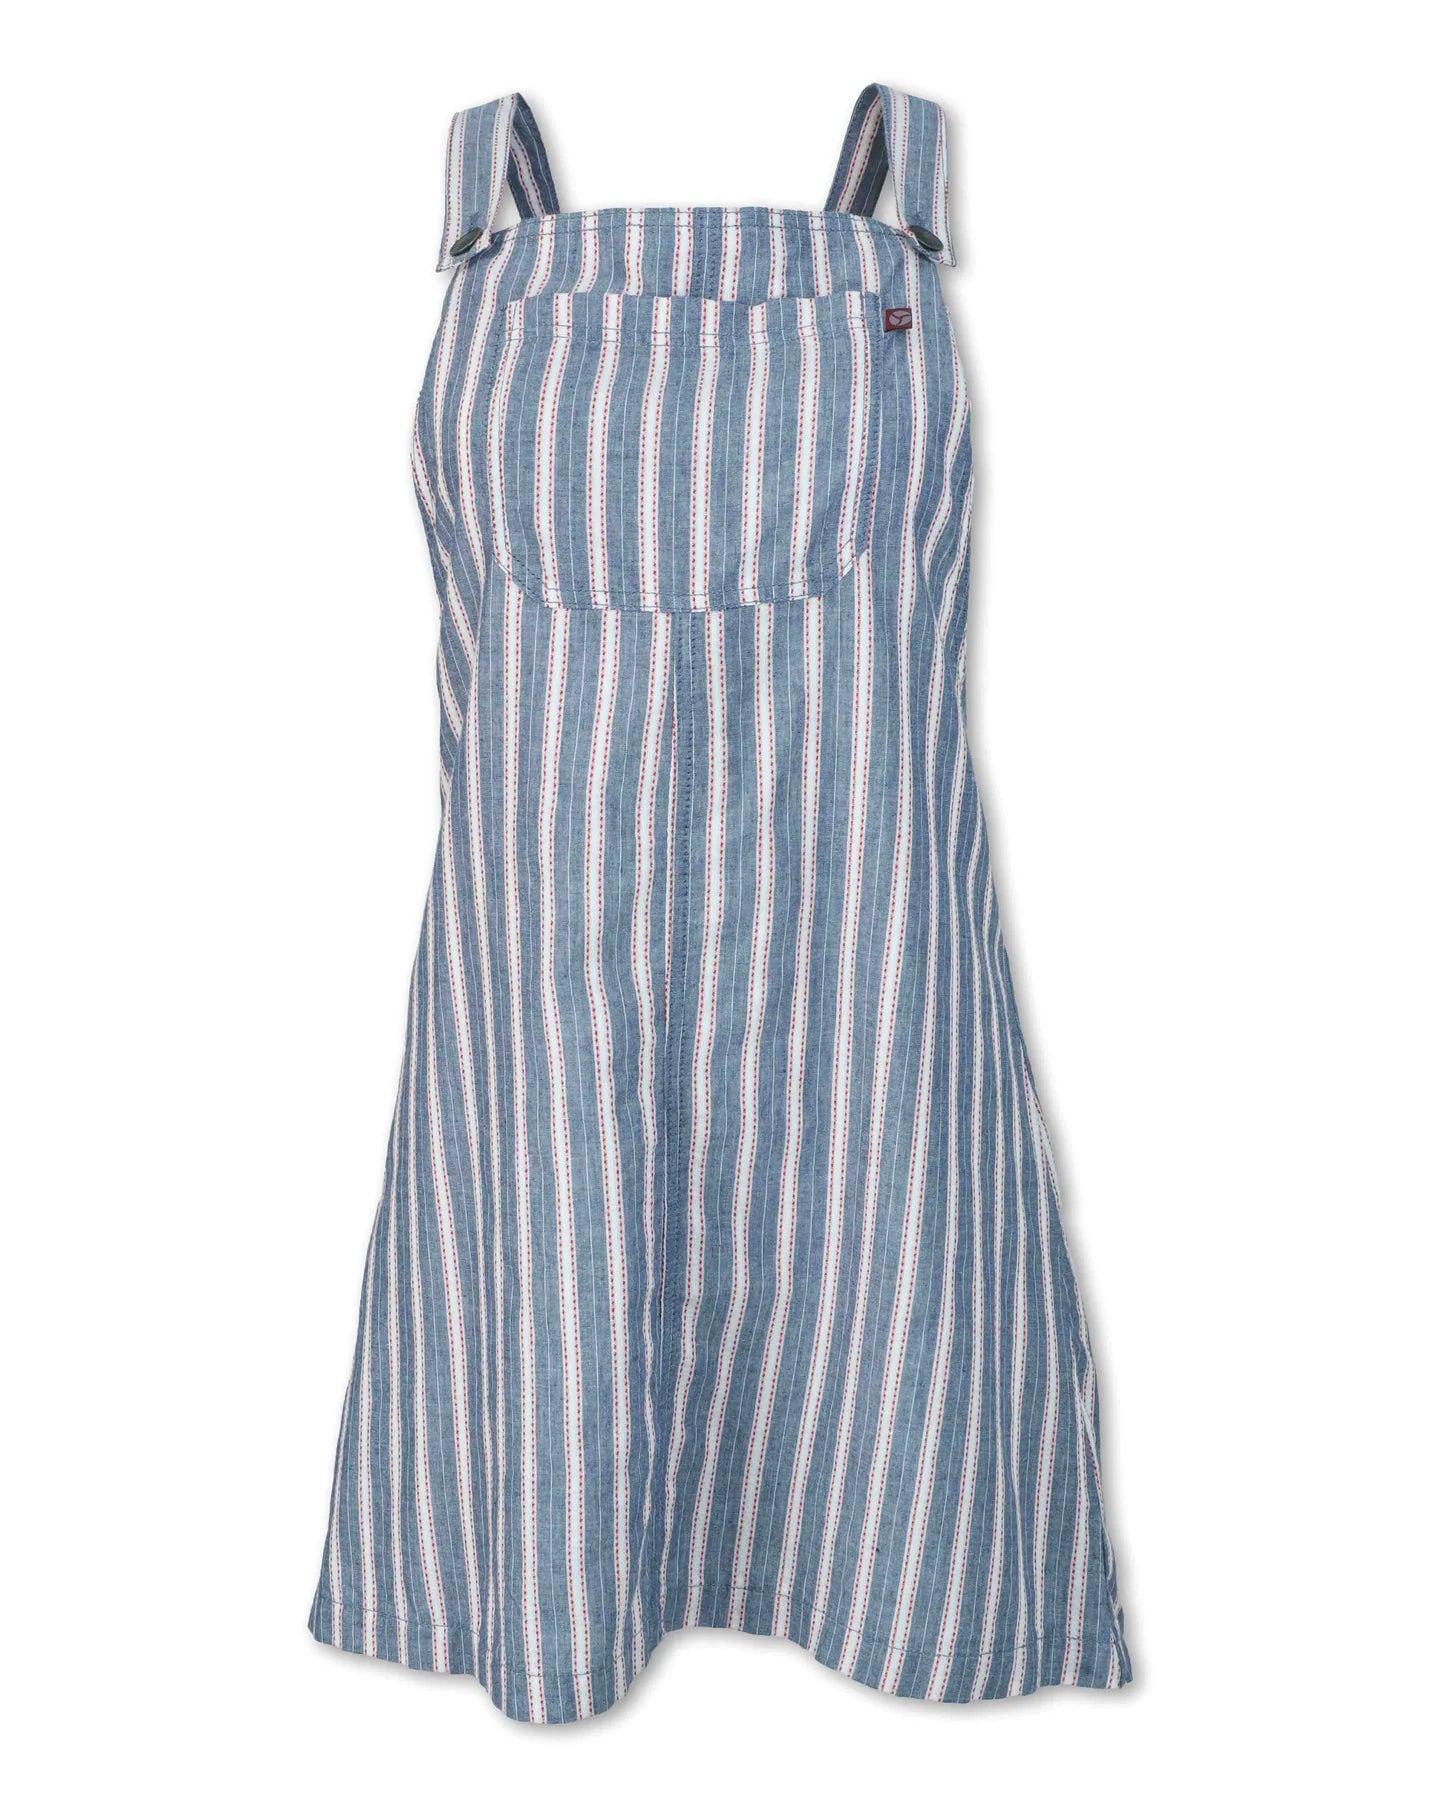 W's Striped Overall Dress